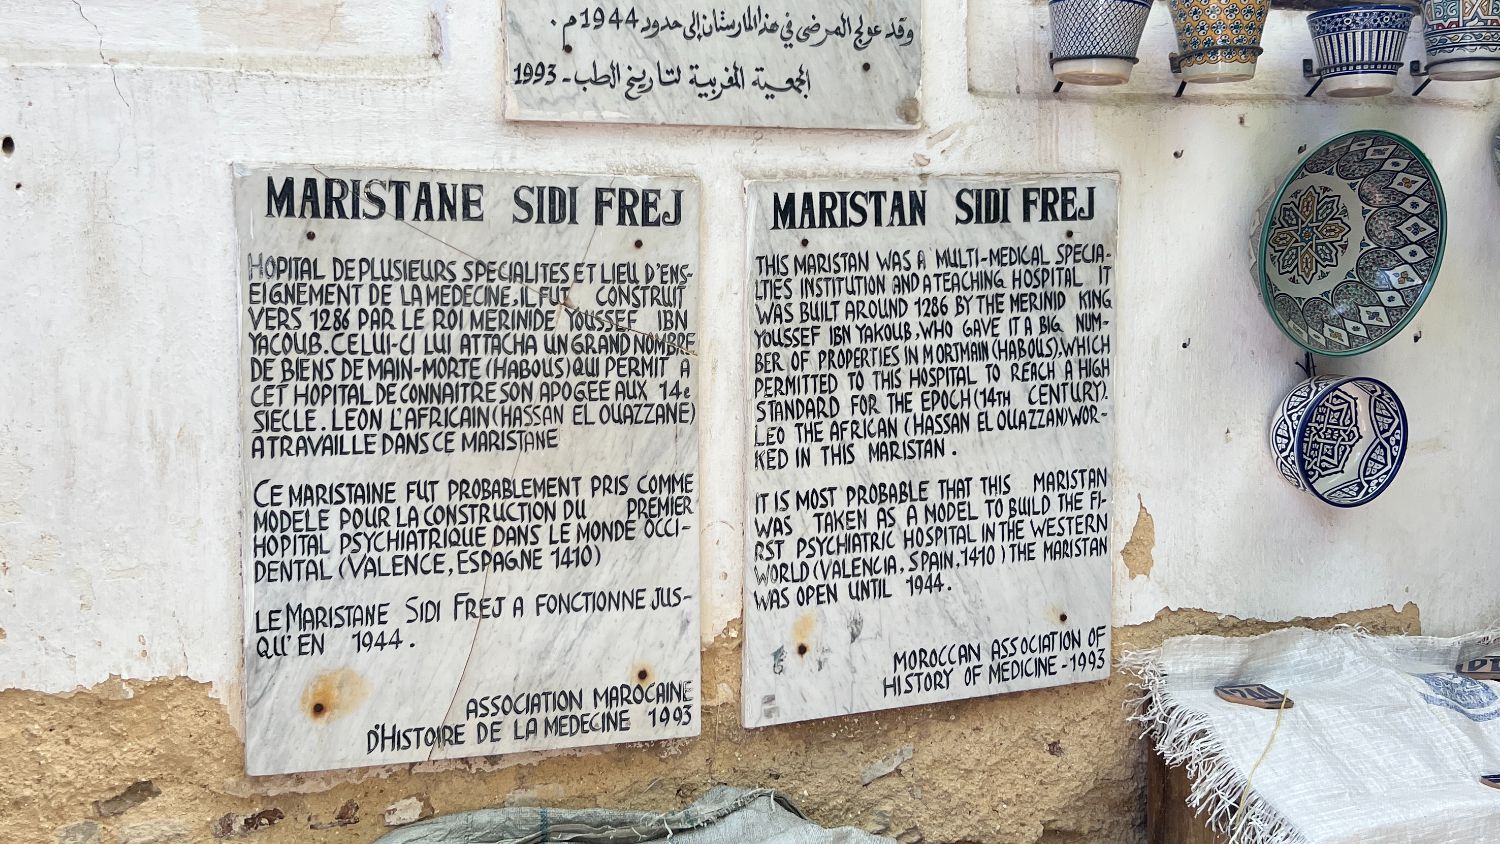 The Maristan of Sidi Frej functioned as a hospice for the destitute and mentally ill up until 1944 (Zirrar Ali)